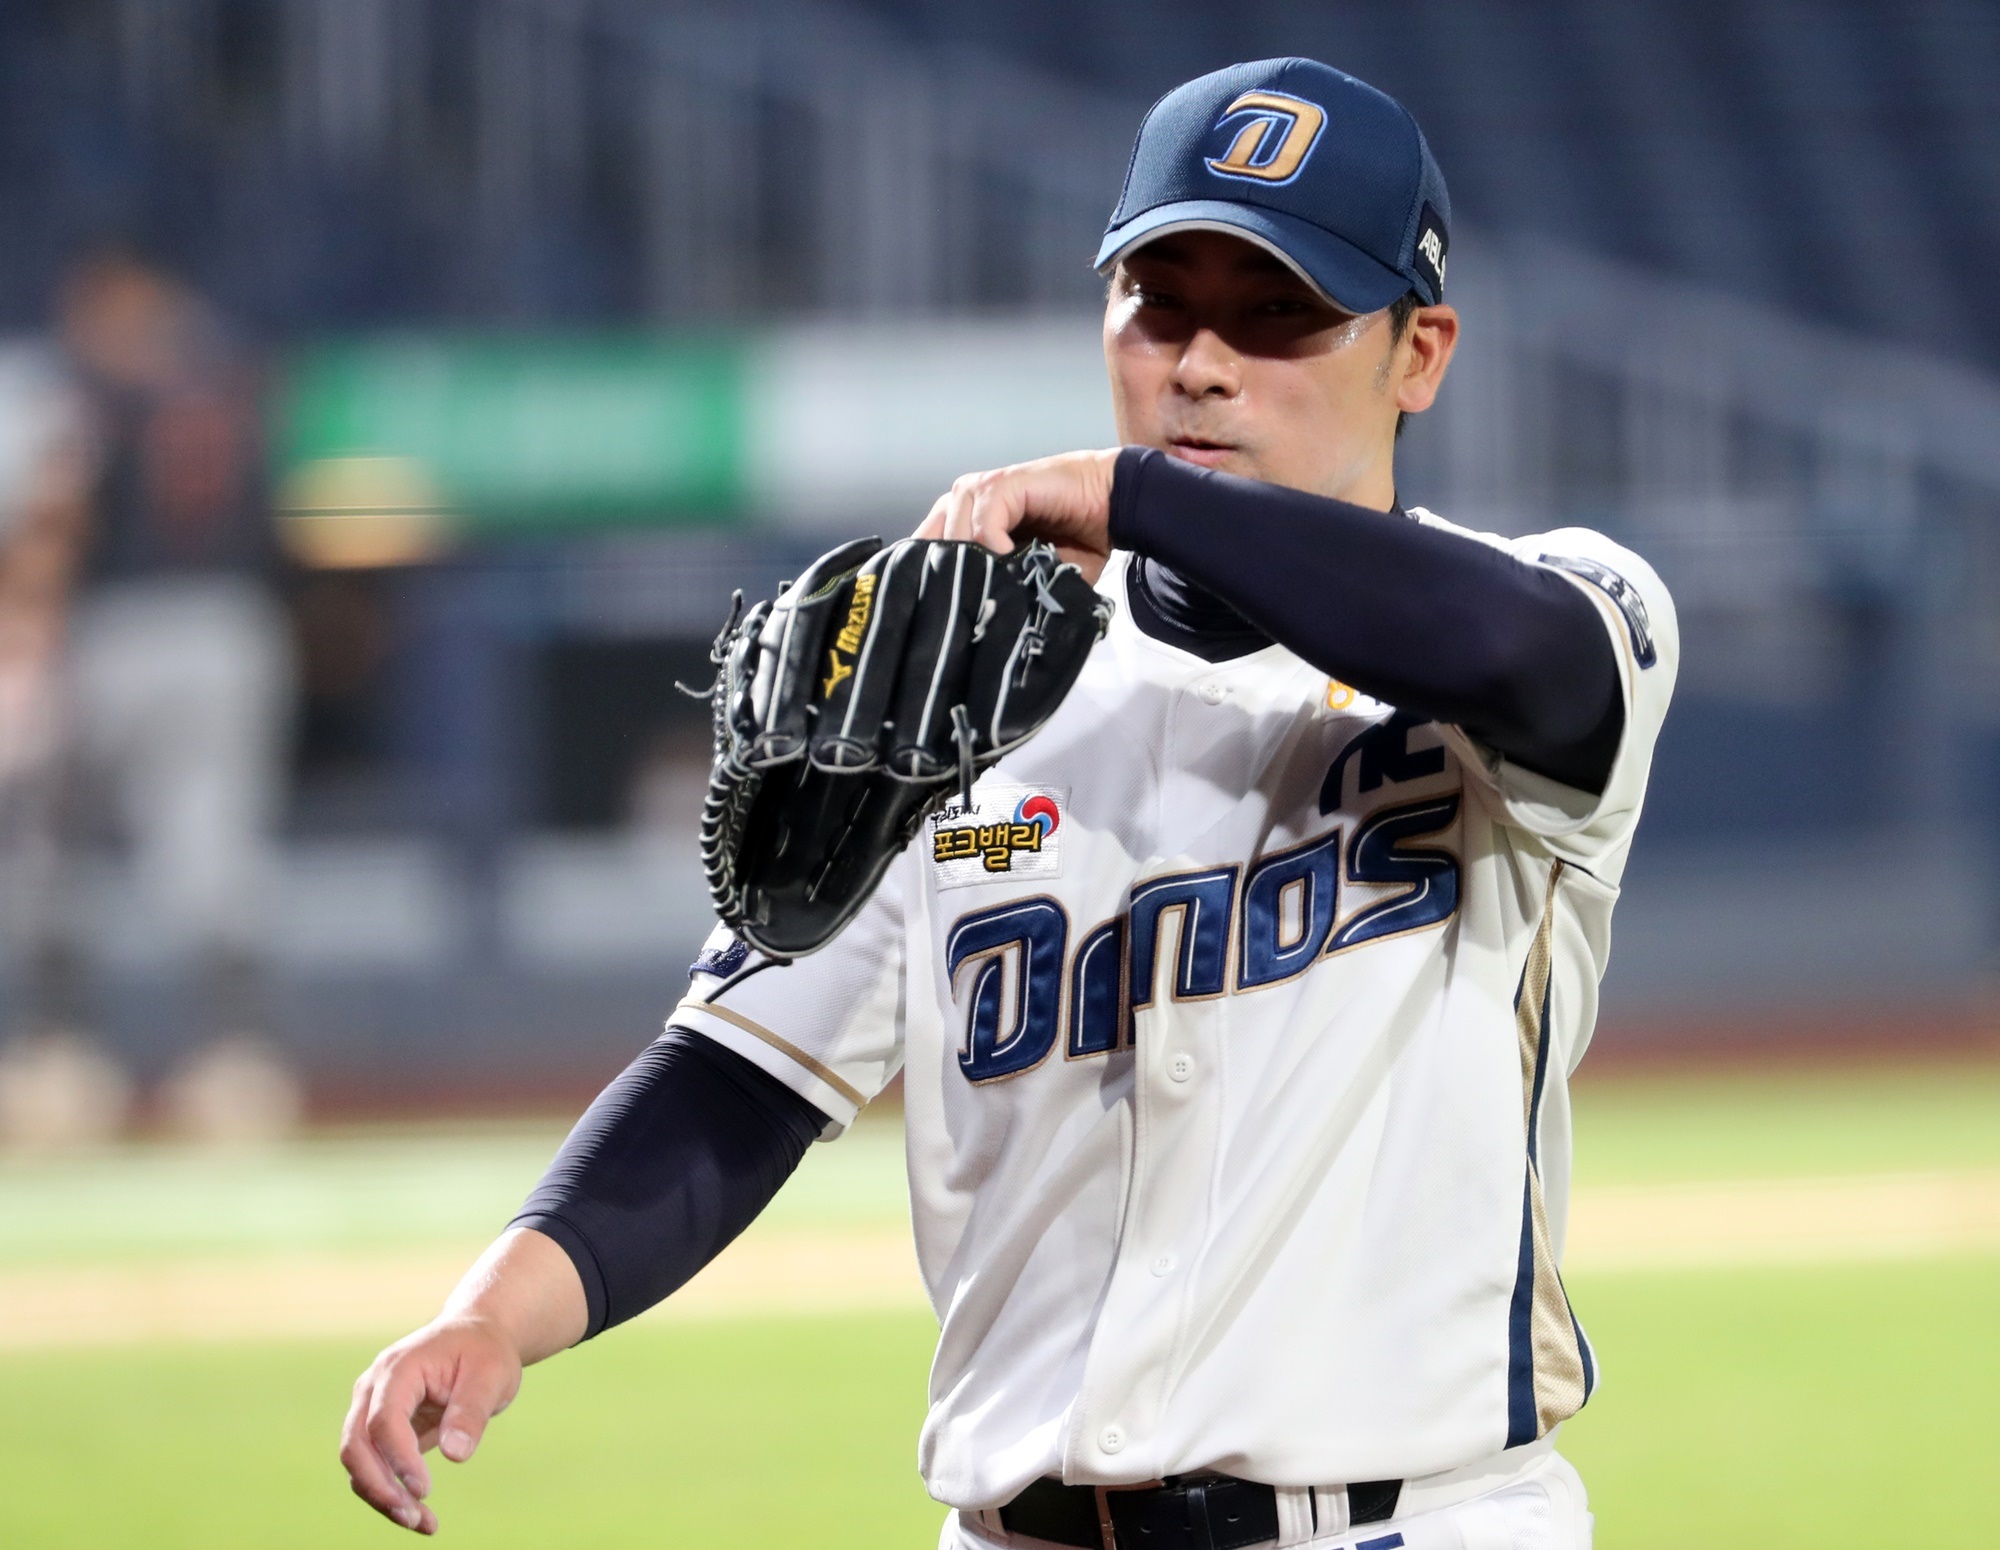 NC Dynos, led by Lee Dong-wook, won 7-1 at the 2020 Shinhan Bank SOL KBOUEFA Champions League LG Twins at NC Park in Changwon, Changwon, Changwon, on the 25th, including a homer in the Kyonggi.NC, who had a momentum by turning the 1-7 inferiority against LG 12-8 the previous day, lightly completed the 6th consecutive victory without losing a single lead on the day (69 wins, 3 draws and 42 losses).NC was the main character of the finals, while Park Min-woo, who hit the first sacrifice fly in the first inning, became the main character of the final, and Kim Hyung-joon, who wore a main mask instead of Lee Myung-ki, No Jin-hyuk and Yang Eui-ji, recorded a multi-hit side by side.In the mound, Song Myung-ki scored his fourth victory of the season with one strikeout in six innings, three hits and three strikeouts, and the veteran pitcher, who came out as the third pitcher, erased LGs eight innings with a stable pitch.NCs former finishing Lim Chang-min, who is on an incredible rise in the second half, is the main character.Lee Min-ho - NCs third finish after Kim Jin-sungNC, who participated in the first group in 2013, was the finishing pitcher of the first year of history and used the seniors Son Min-han (NC pitching coach) and high school graduate Lee Min-ho (social service personnel) in the 17th year of professional career.The two players collaborated on 19 saves in 2013 and played a relatively good role in NC, which had not been thick in pitchers, but were shown by top-level finishers such as Oh Seung-hwan (Samsung Lions), Son Seung-rak, Bong Jung-geun (KBS N SPORTS commentator), Oh Seung-hwan (Samsung Lions) It was a bit far from a powerful sense of daunting.Coach Kim Kyung-moon (now national team manager) left the back door to Kim Jin-sung, who was a save king of the Futures UEFA Champions League in 2014 and joined NC after being tested and grew up as a first-team player.Kim Jin-sung, who has a strong guts and heavy fastball, made his debut in 58Kyonggi in 2014 and ranked fourth in the save category with 3 wins, 3 losses, 25 saves, 1 hold average of 4.10, contributing greatly to NCs first fall baseball.Kim Jin-sungs success story along with NCs propaganda has also become a hot topic.However, Kim Kyung-moon wanted a stronger finishing pitcher, and in 2015, Lim Chang-min, who was in the eighth year of the professional, finally had a chance.Lim Chang-min, who joined Our Heroes (now Kiwoom) after receiving a second-round (11th overall) nomination in the 2008 rookie draft, was a thorough unknown pitcher who only made 5 Kyonggi appearances in four years at Heroes.Eventually Lim Chang-min moved to NC through Trade in November 2012, the first trade of NCs founding.Lim Chang-min, who played in the middle of the game in 2013 and 2014, had 12 wins and 14 holds for two years, took the temporary finishing position in 2015 when Kim Jin-sung left the first group due to a calf injury, but kept NCs back door until the end of the season.Lim Chang-min finished second in the save category with a 1 win, 5 losses and 31 saves ERA 3.80 in 61 Kyonggi, despite his full-fledged finish from May.After the season, he was selected for the Premier 12 national team and experienced international competitions.In 2016, he also made his debut as a set-up man at the end of the season, but he led NC to advance to the first Korean series by raising his score to 65Kyonggi with 1 win, 3 losses, 26 saves, 6 hold ERA 2.57.Lim Chang-min also made 60Kyonggi in 2017, scoring 4 wins, 3 losses, 29 saves ERA 3.68 and making 86 saves in the final three years, making it a solid finish for NC.No one has made more saves than Lim Chang-min in the UEFA Champions League in the same period.Lim Chang-min in the first half of the first half, a magical turn of 0.49 in the second halfHowever, Lim Chang-min has played in 186 Kyonggi in the regular UEFA Champions League for three years and has played 200 innings.Although there have not been many multi-innings like the 1980s and 1990s, there have been many cases of Kyonggi, not save situations.Eventually, Lim Chang-min was cancelled from the first-team entry due to an elbow injury after the opening 8Kyonggi season of the 2018 season and underwent elbow ligament bonding surgery at a modest age heading into his mid-30s.NC was in the division with 14 saves for Lee Min-ho, who left Lim Chang-min in 2018, but failed to avoid the humiliation of the first bottom after the foundation.NC returned to the fall baseball in a year after A Year Ago in Winter set-up man Won Jong-hyun, who reorganized the team with Lee Dong-wooks managerial system, transformed into a final.However, Lim Chang-min, who returned from rehabilitation in July, was not included in NCs must-win team even though he made a good 2.40 ERA in 20Kyonggi.Lim Chang-min struggled to regain the merits of this years closing season, which is a real full-time return season, but only came back with a poor report card of 2-1 in the first half and 2-hold ERA 10.64.Most baseball fans have just said that Lim Chang-min, who is 36 years old in Korea, will no longer be able to expect a pitch like his prime.But for Lim Chang-min, the first half slump was just a preparation for a bigger leap in the second half.Lim Chang-min, who was excluded from the first-team entry twice in the first half, returned to Group 1 on August 16 and gave up only one earned run in 18.1 innings at 16Kyonggi, continuing a brilliant run of 4 wins, 6 hold ERA 0.49.Considering Lim Chang-mins age and poor first half, it is a truly surprising reversal.Lim Chang-min also climbed on the mound in the eighth inning, 6-1 ahead of LG on the 25th, and he pitched a 1-hit1 strikeout and scored a consecutive Kyonggi scoreless 6th.The pitchers who led NC Bullpen in the mid to late 2010s, along with left-hander Lim Chung-ho, became Lim Chang-min and Kim Jin-sung at 36 years old and Won Jong-hyun at 34 years old.This year, which is the number one player in the UEFA Champions League, is a great opportunity to challenge the Korean Series, which has never been up throughout his career.Maybe Lim Chang-mins second-half major breakthrough comes from a strong will and desire to catch the opportunity of this lifetime.On the 25th, LG scored 1 innings without a run .. 4 wins 6 hold ERA 0.49 in the second half.